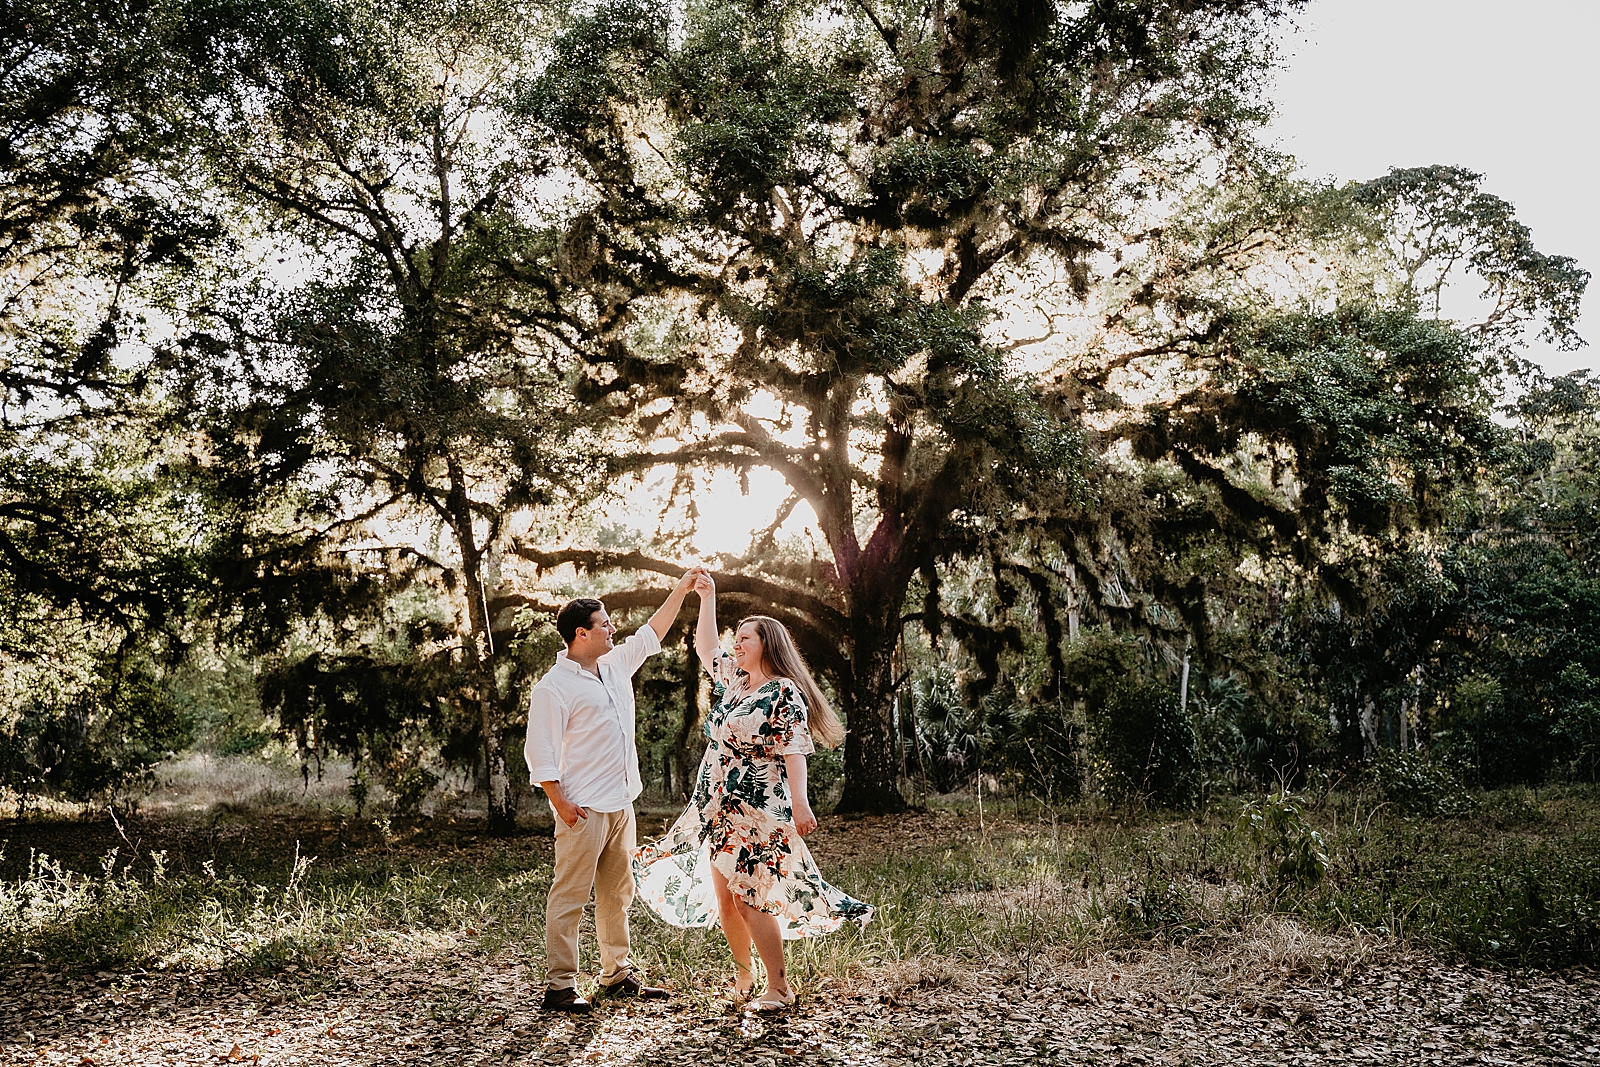 Couple pirouetting in the forest as the sun shines in Riverbend Park Engagement Photography captured by South Florida Engagement Photographer Krystal Capone Photography 